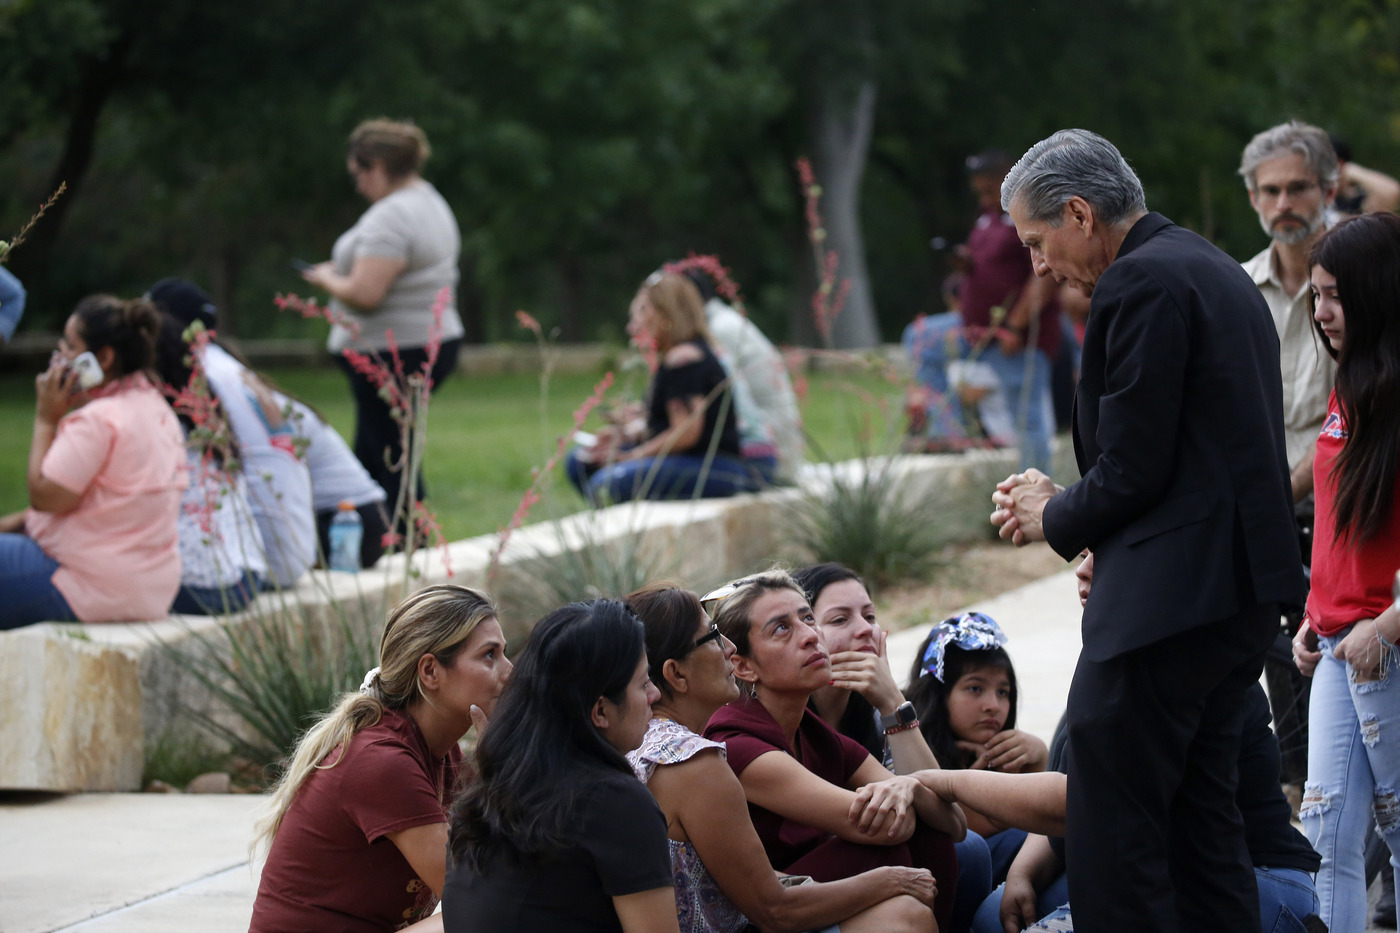 CORRECTS SPELLING TO GARCIA-SILLER, INSTEAD OF GARCIA SELLER - The archbishop of San Antonio, Gustavo Garcia-Siller, right, comforts families outside the Civic Center following a deadly school shooting at Robb Elementary School in Uvalde, Texas, Tuesday, May 24, 2022. (AP Photo/Dario Lopez-Mills)